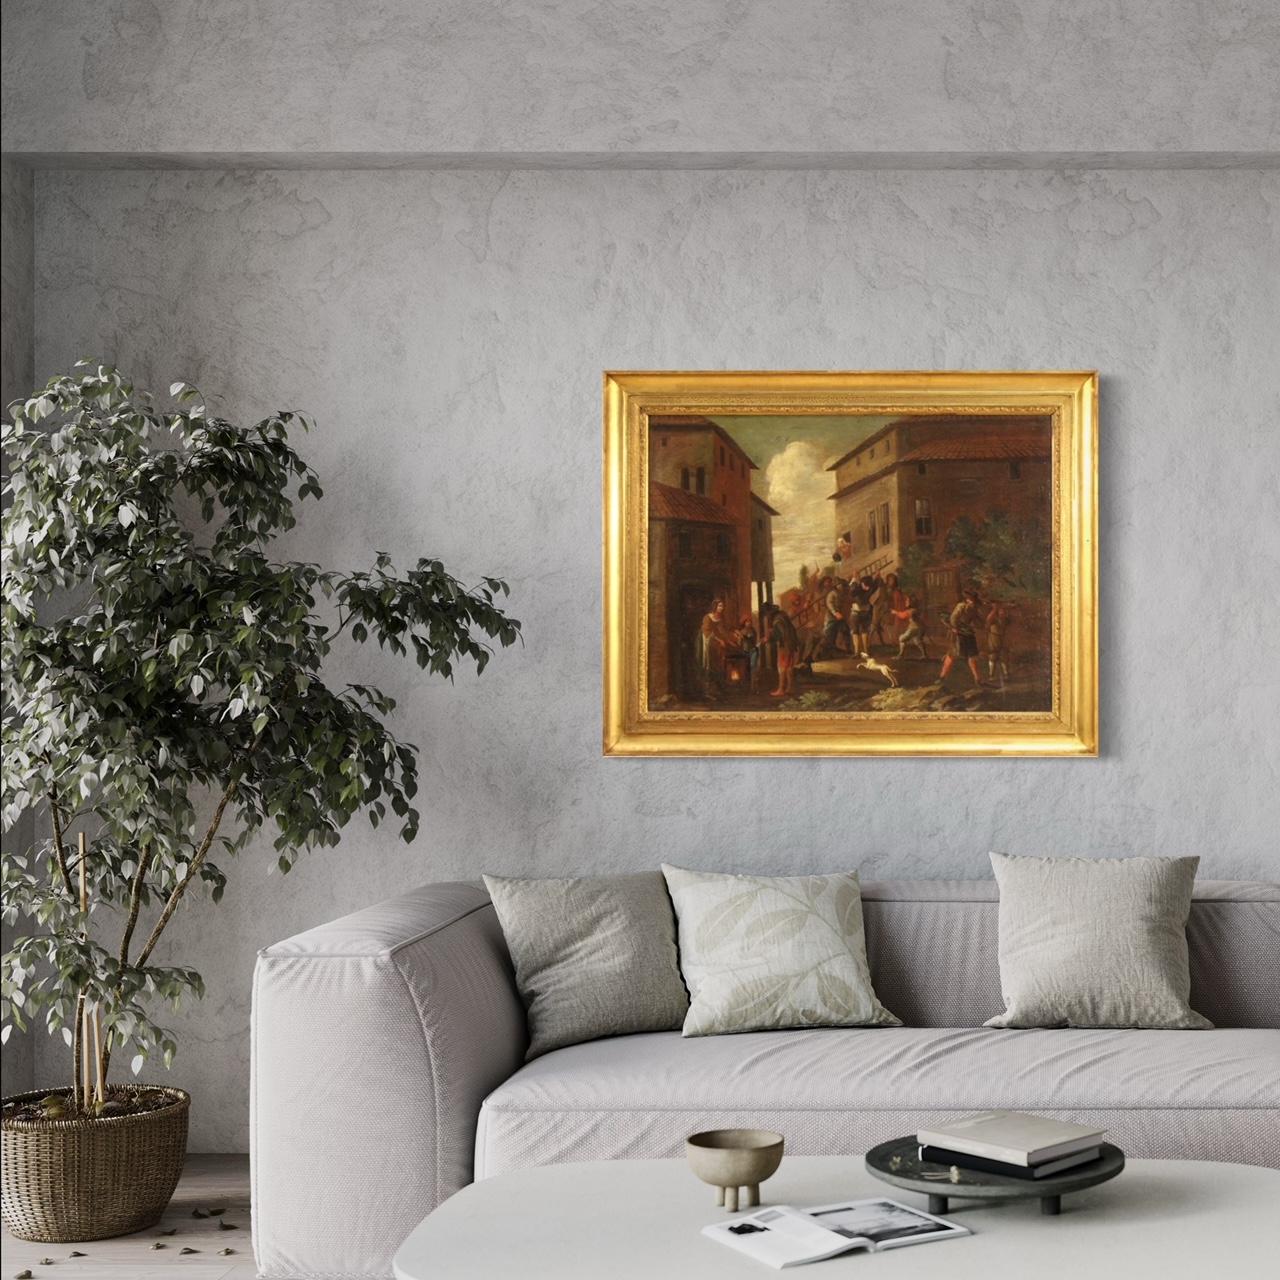 Antique Italian painting from the 18th century. Artwork oil on canvas depicting genre scene, View with architectures and characters of popular style of excellent pictorial quality. Painting of beautiful size and excellent proportion, ideal to be